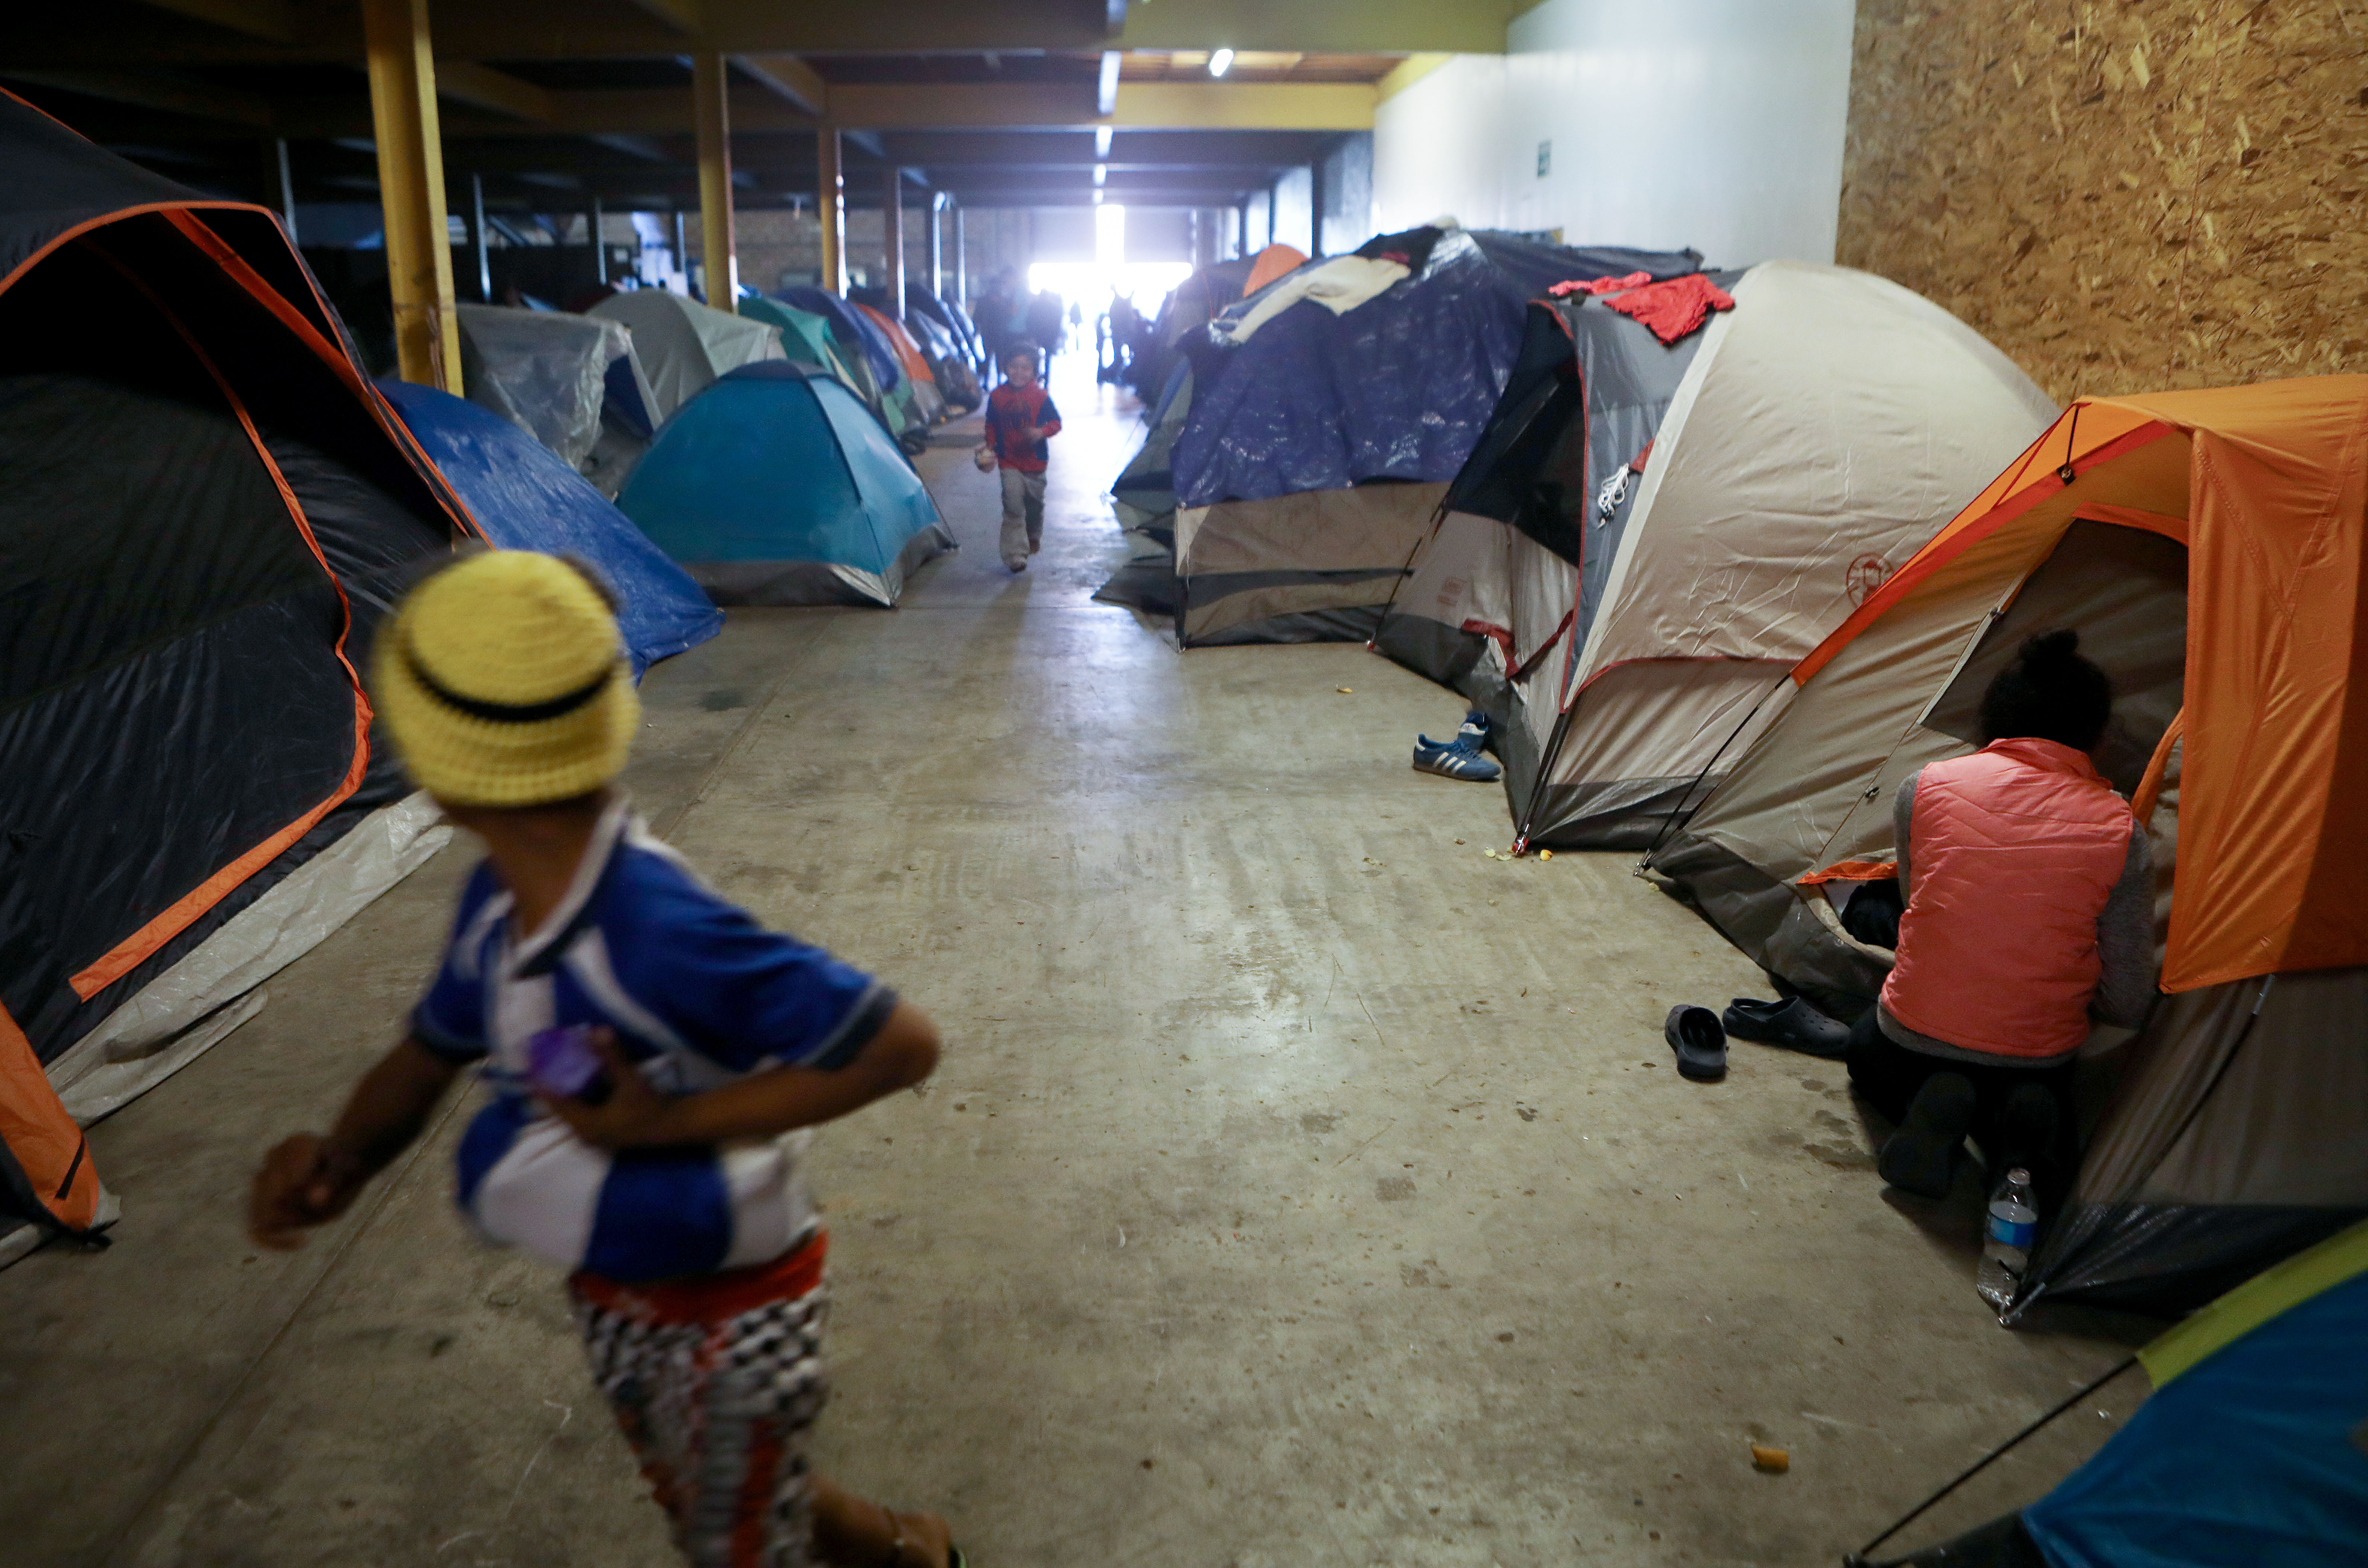 TIJUANA, MEXICO - DECEMBER 16: Migrants gather in the third shelter opened to migrants in Tijuana weeks after thousands from the 'migrant caravan' arrived in the border city on December 16, 2018 in Tijuana, Mexico. (Photo by Mario Tama/Getty Images)